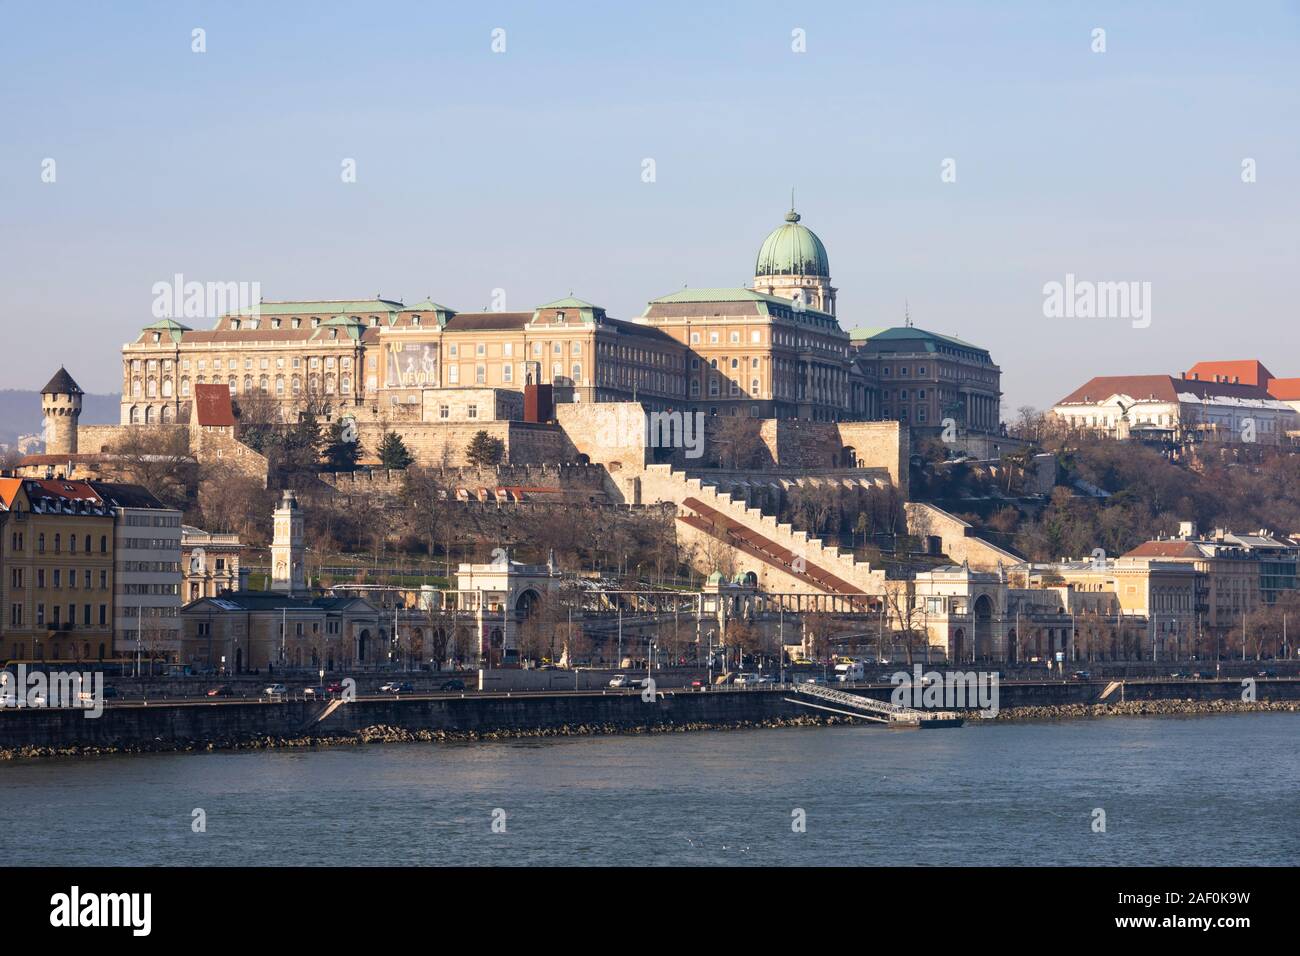 Buda Castle royal palace on Castle Hill, Buda, Winter in Budapest, Hungary. December 2019 Stock Photo